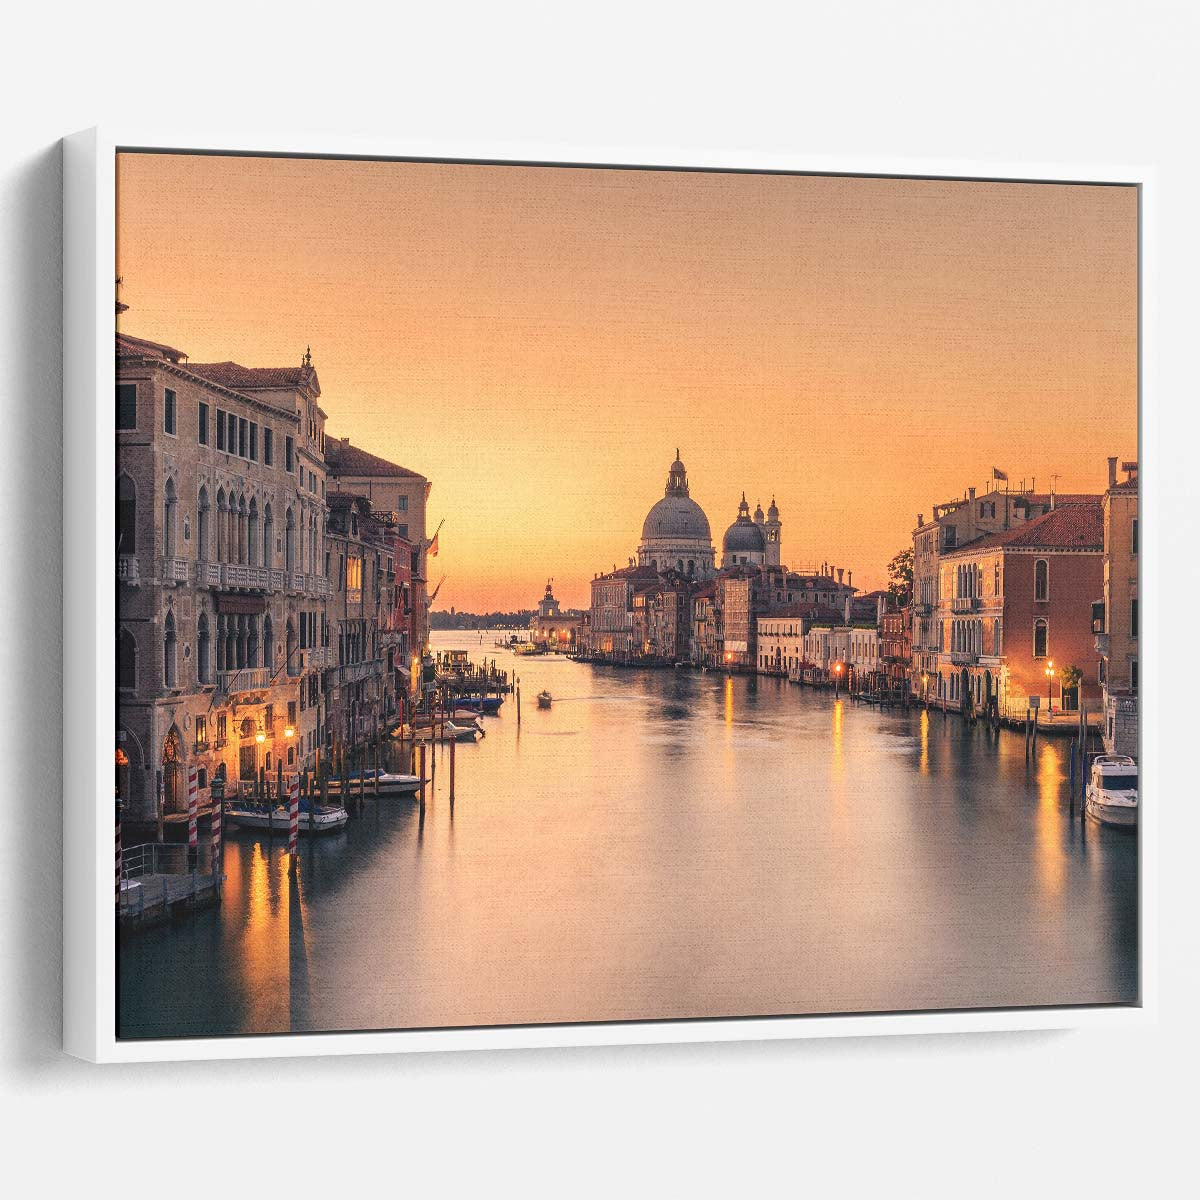 Venice Sunrise Historic Canals & Cityscape Wall Art by Luxuriance Designs. Made in USA.